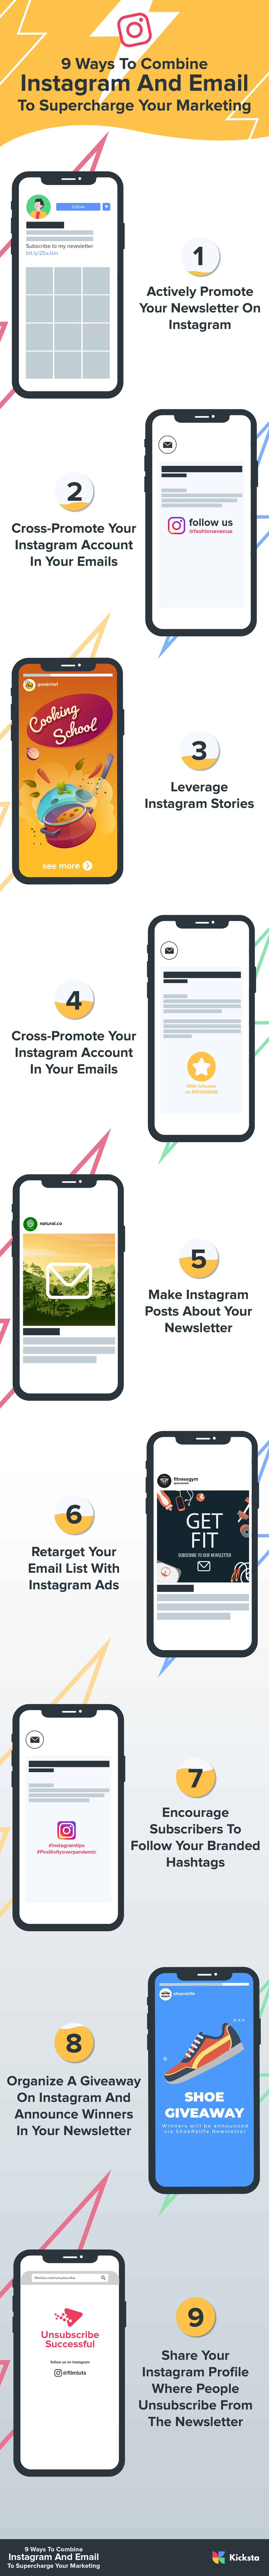 Combining Instagram & Email Marketing: Infographic